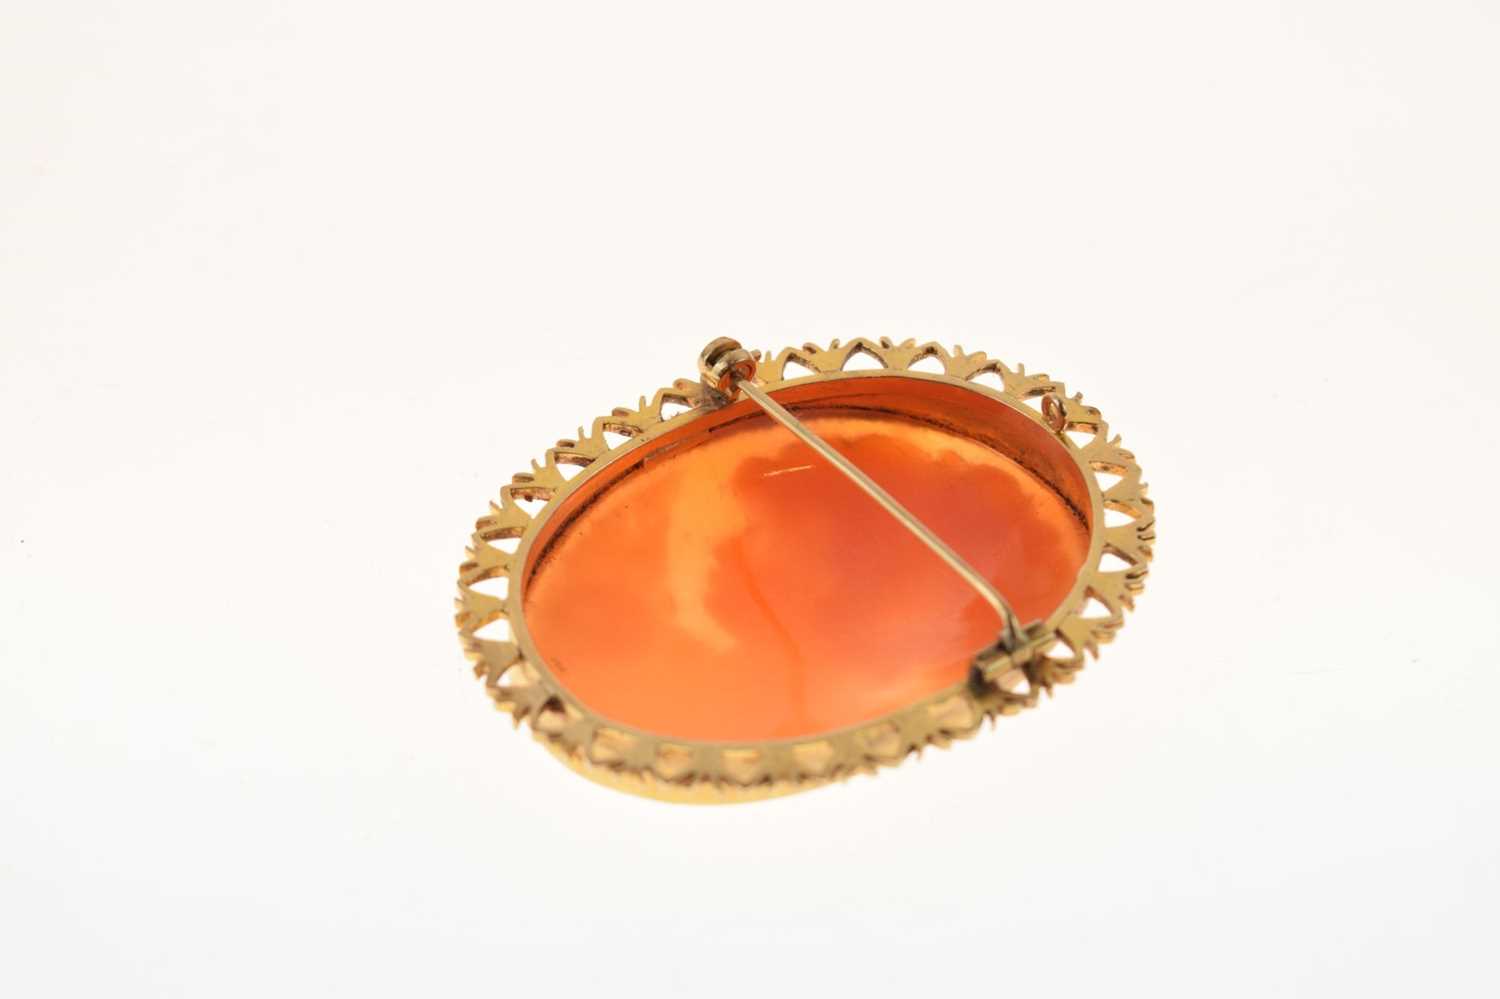 Modern 9ct gold cameo brooch - Image 5 of 7